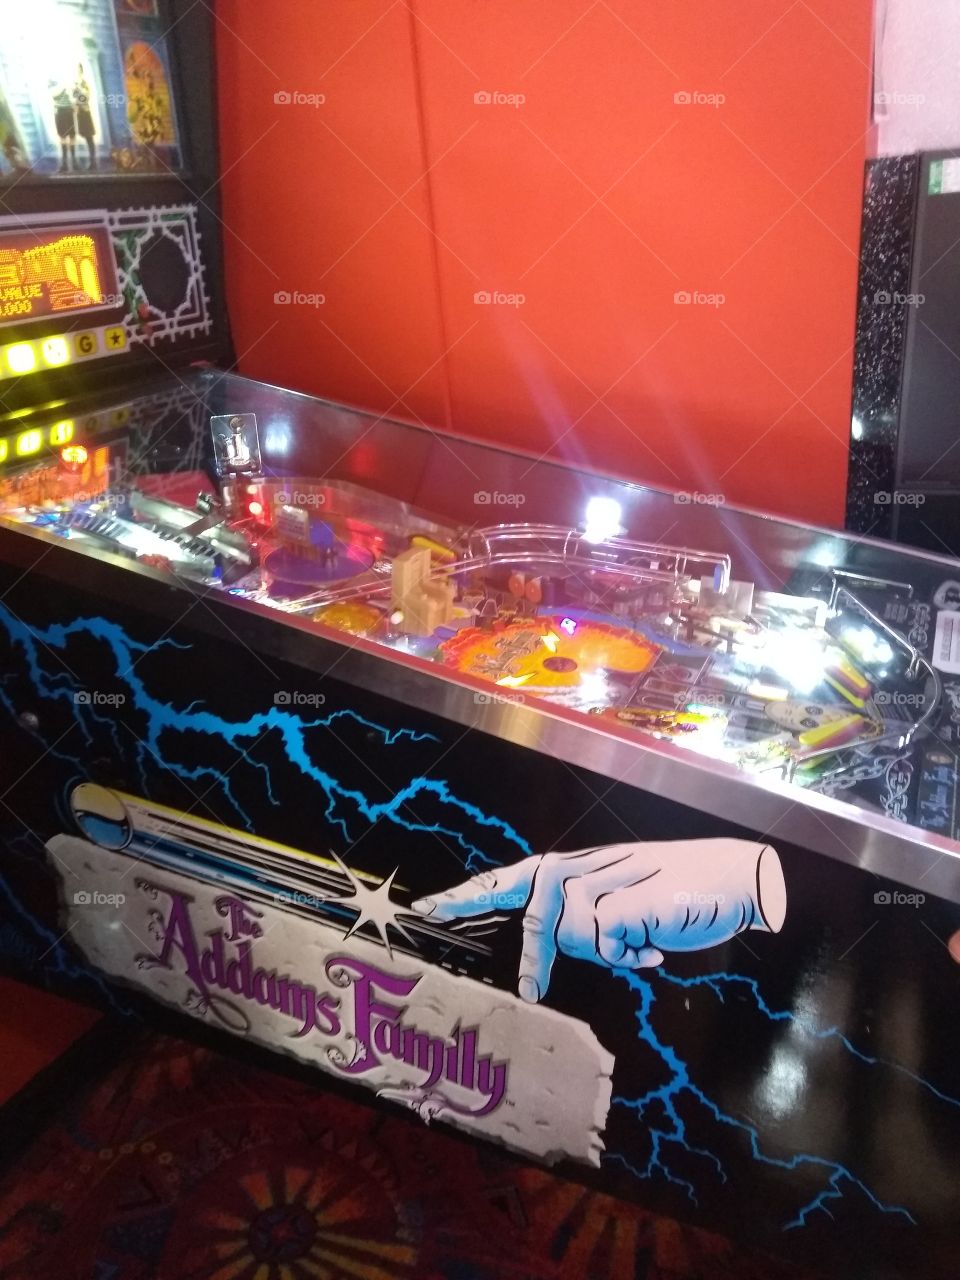 pinball machines. Addams Family. great game to play